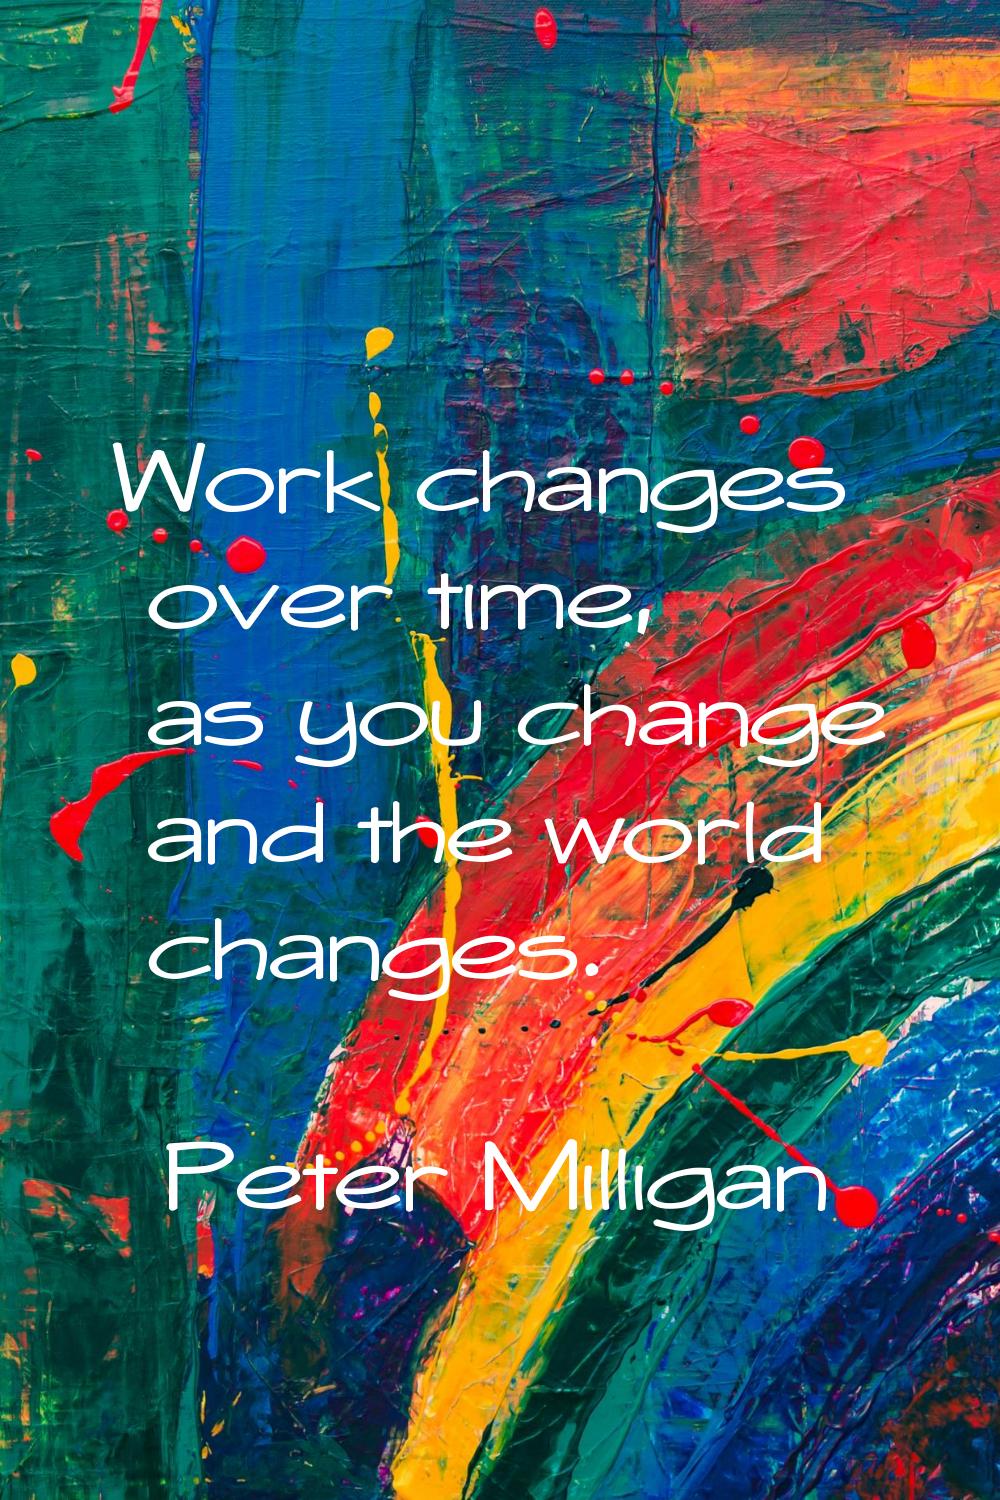 Work changes over time, as you change and the world changes.